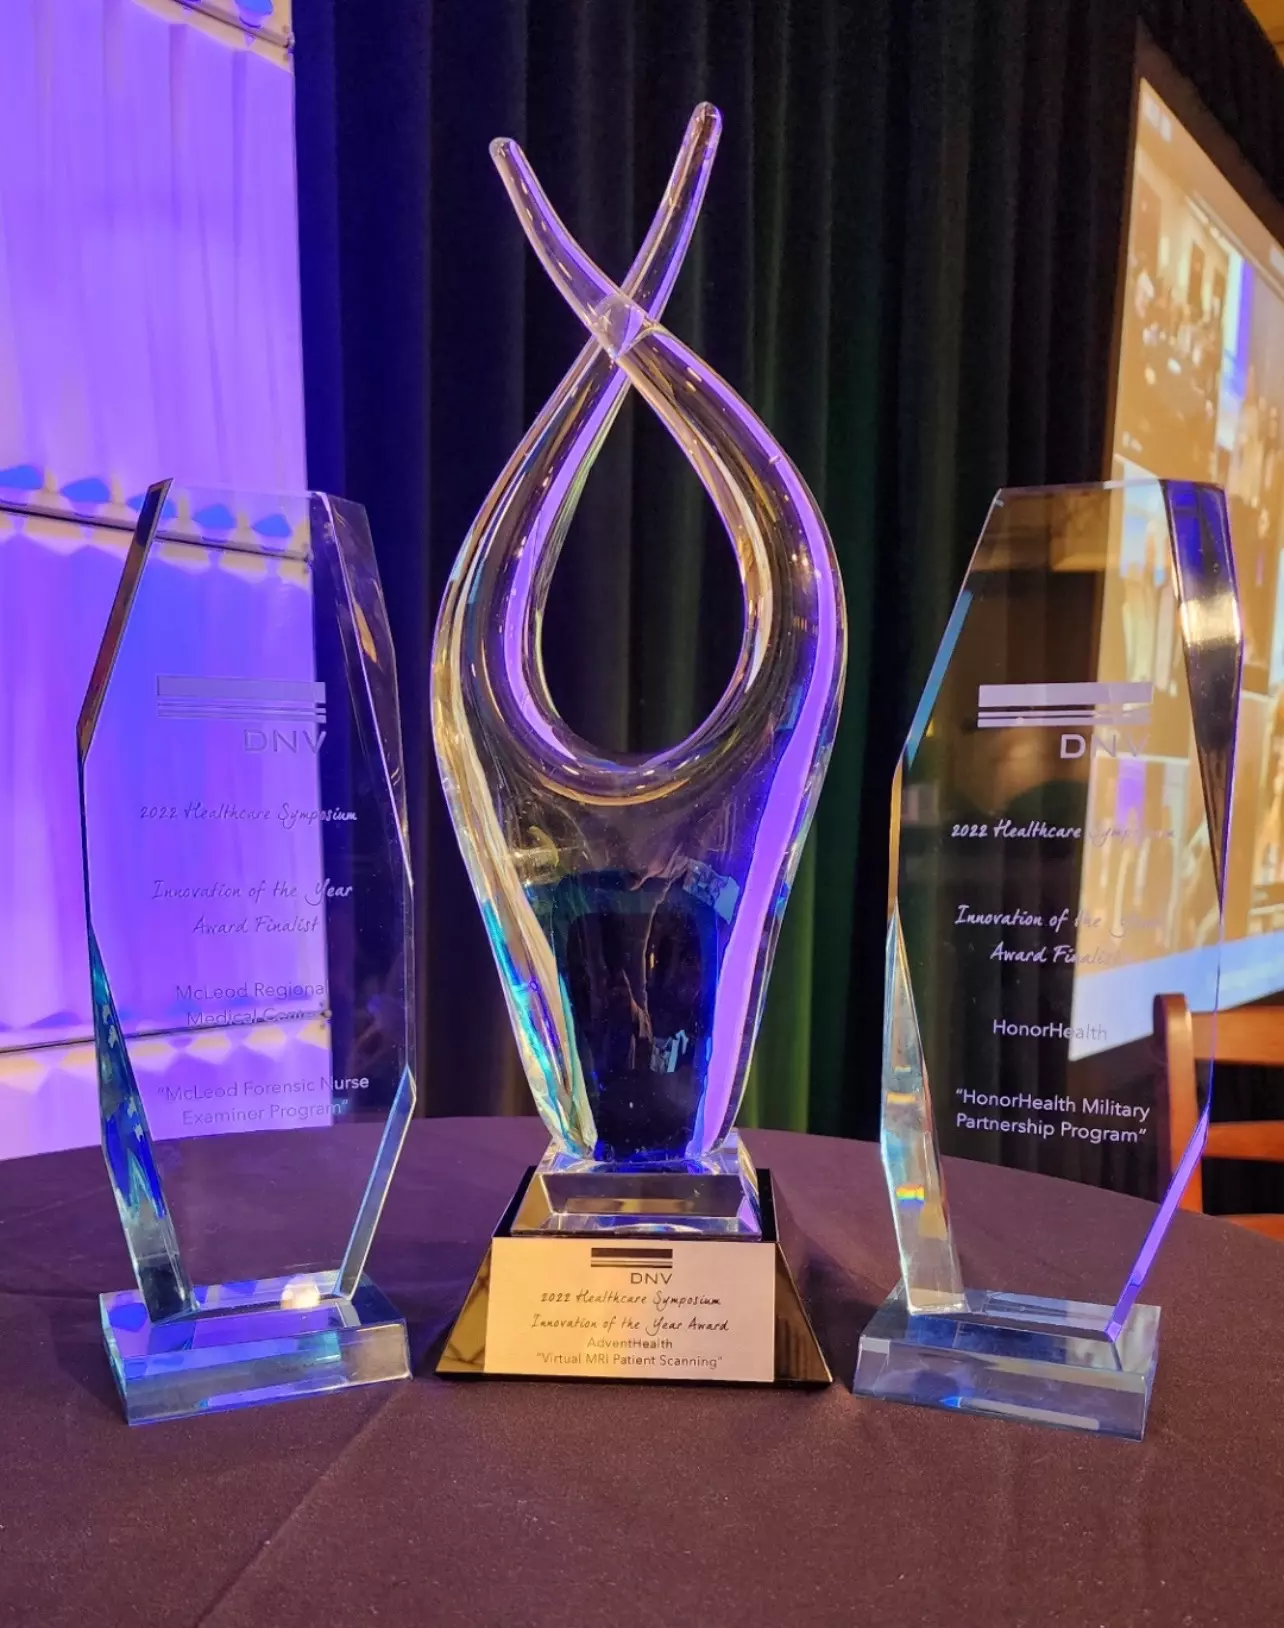 AdventHealth received the Healthcare Innovation of the Year award during the DNV Healthcare annual symposium in Louisville, Kentucky.